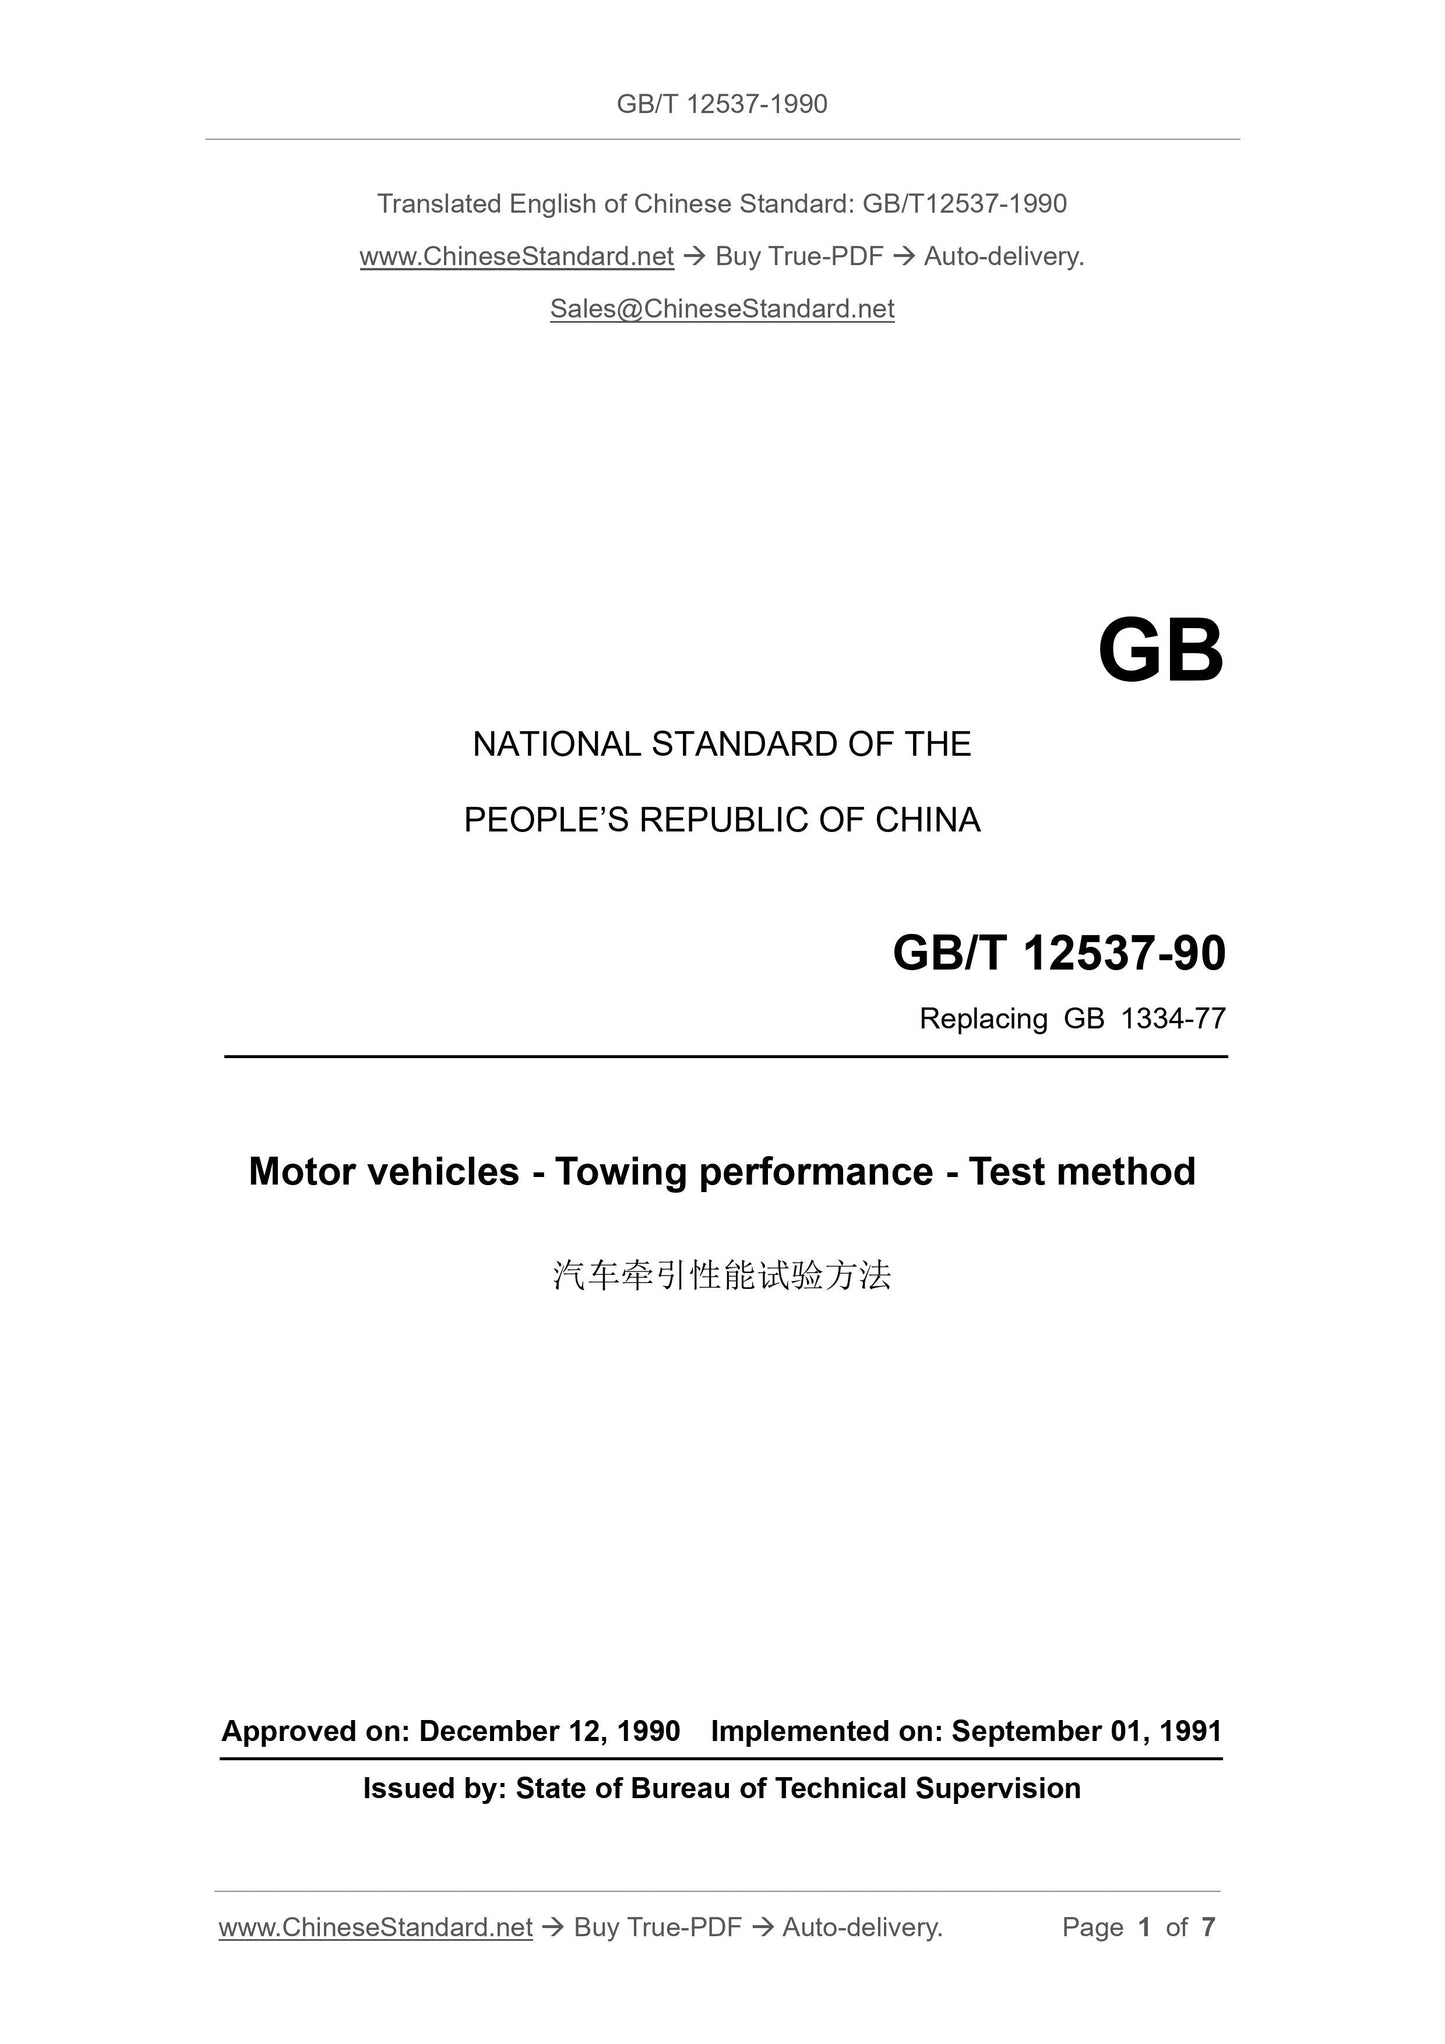 GB/T 12537-1990 Page 1